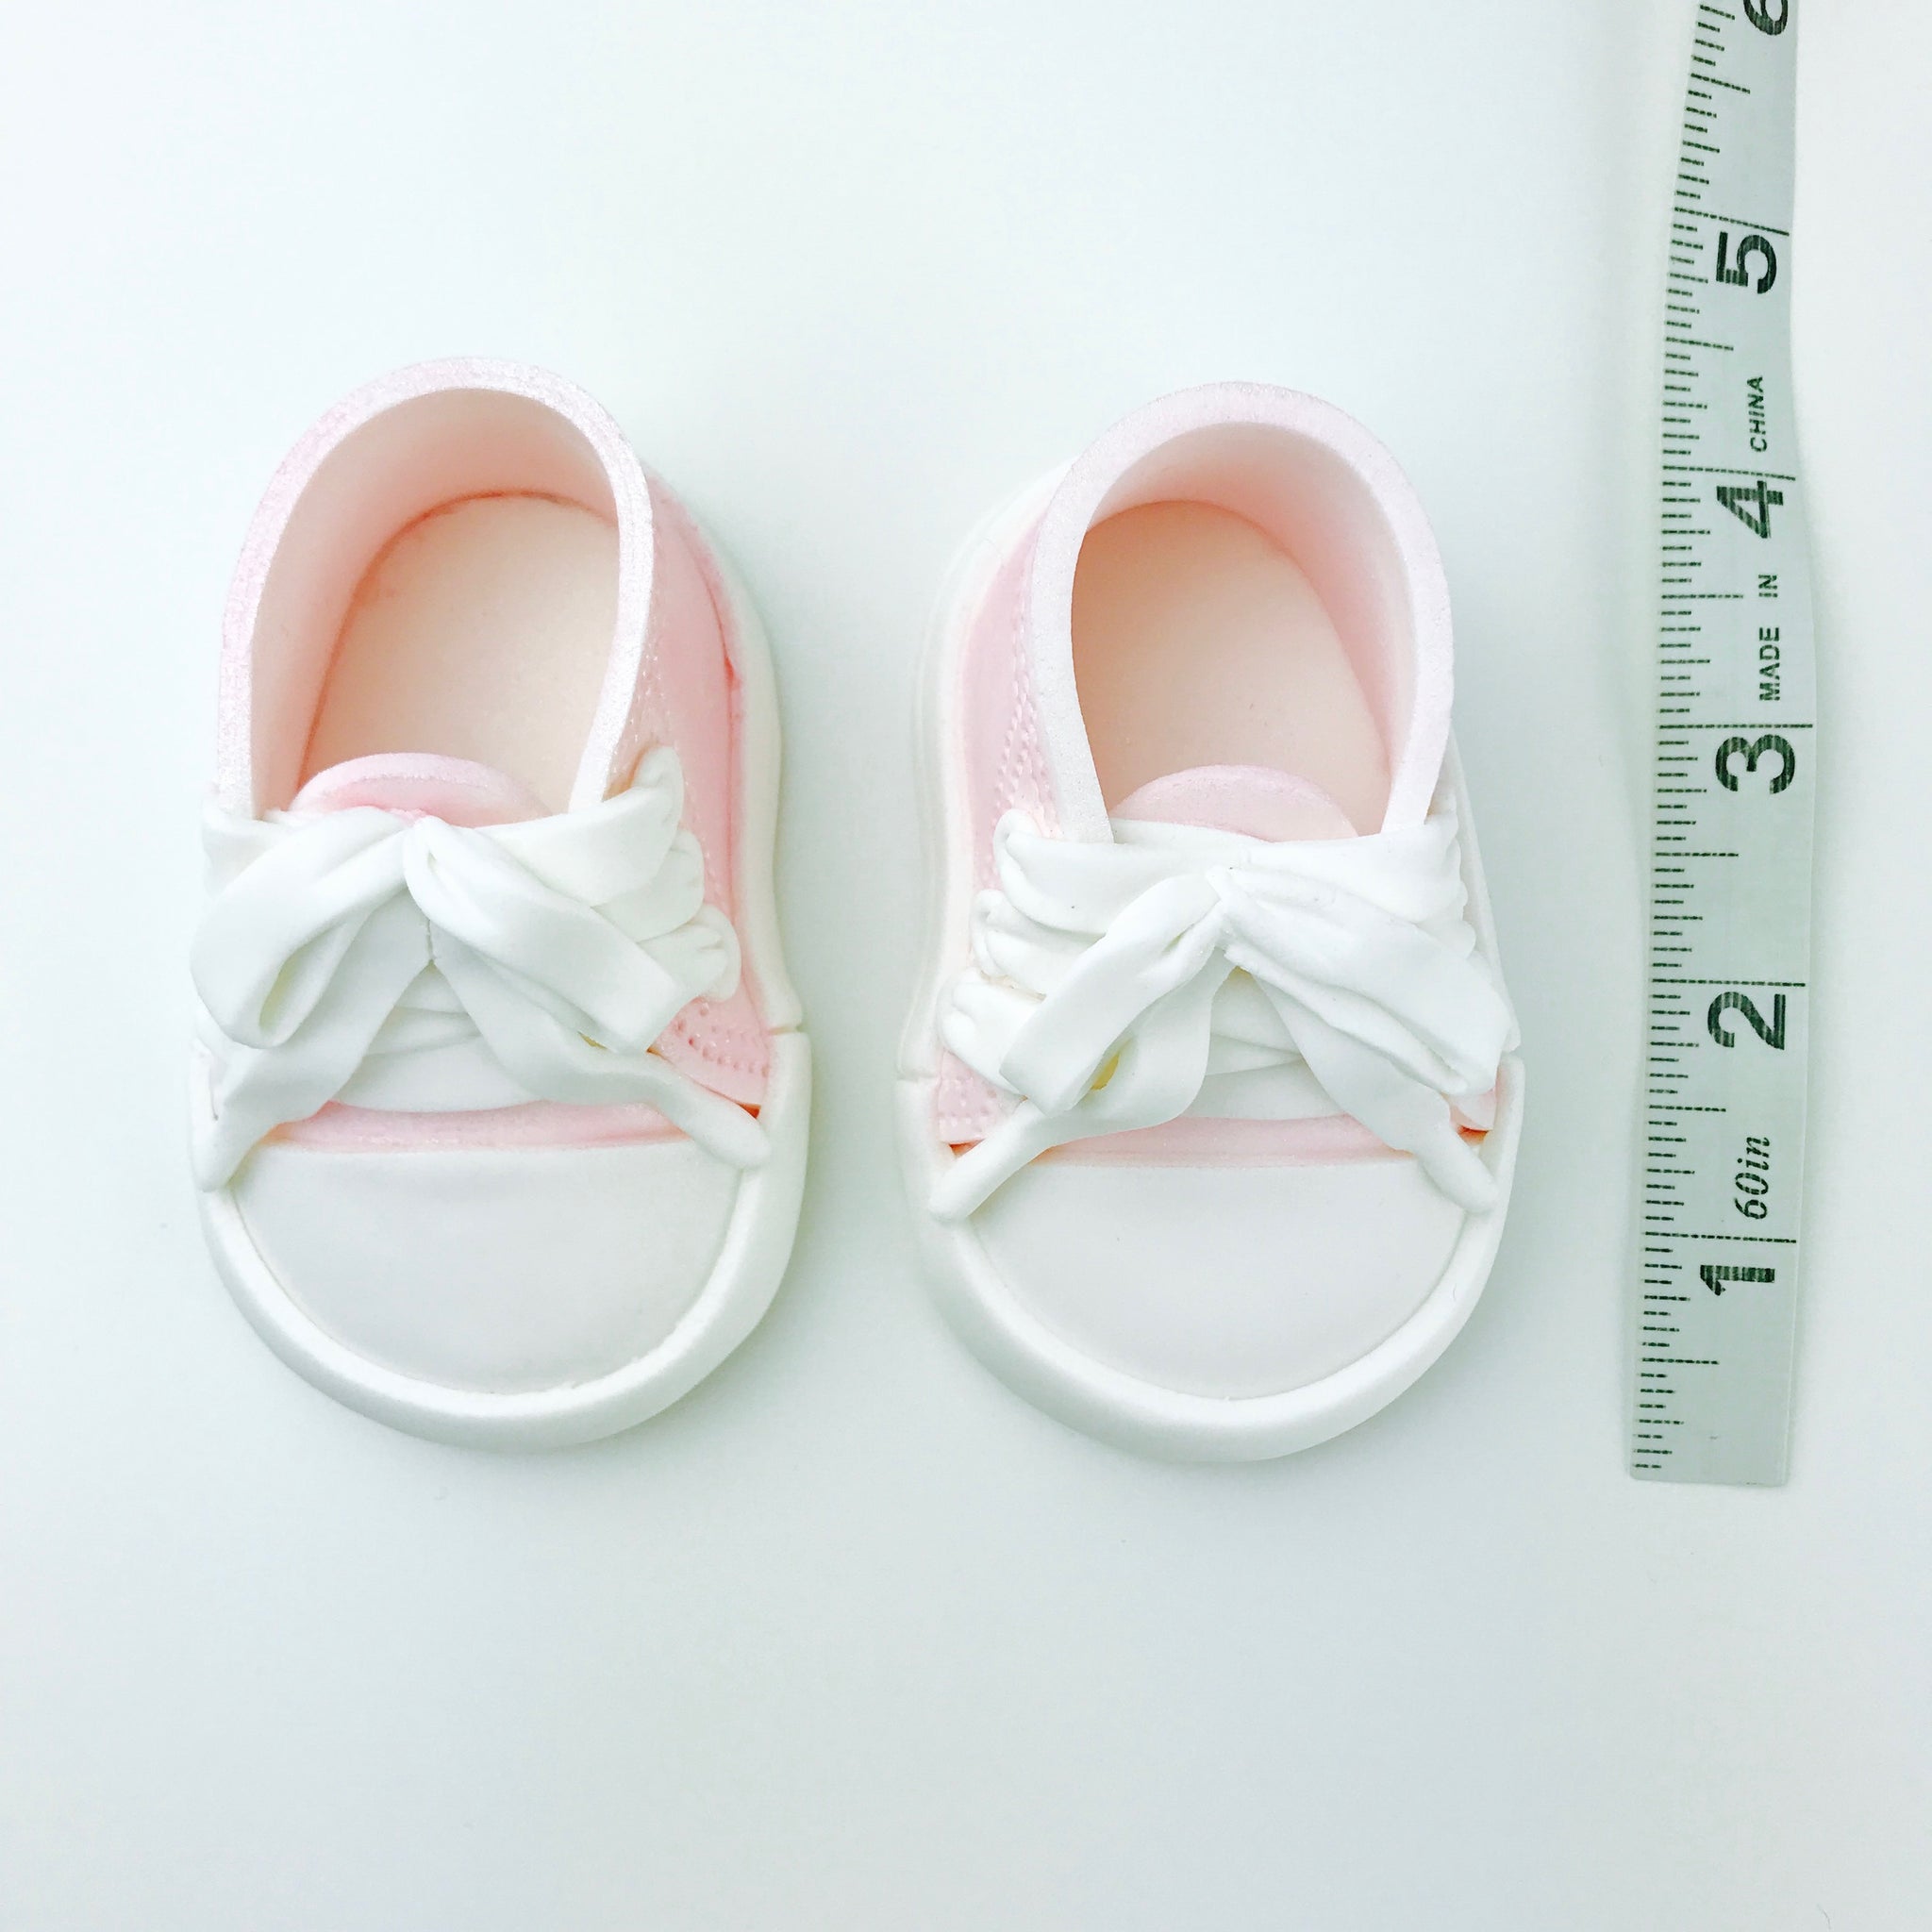 Baby Shoes Cake Topper in Pink - Ships 